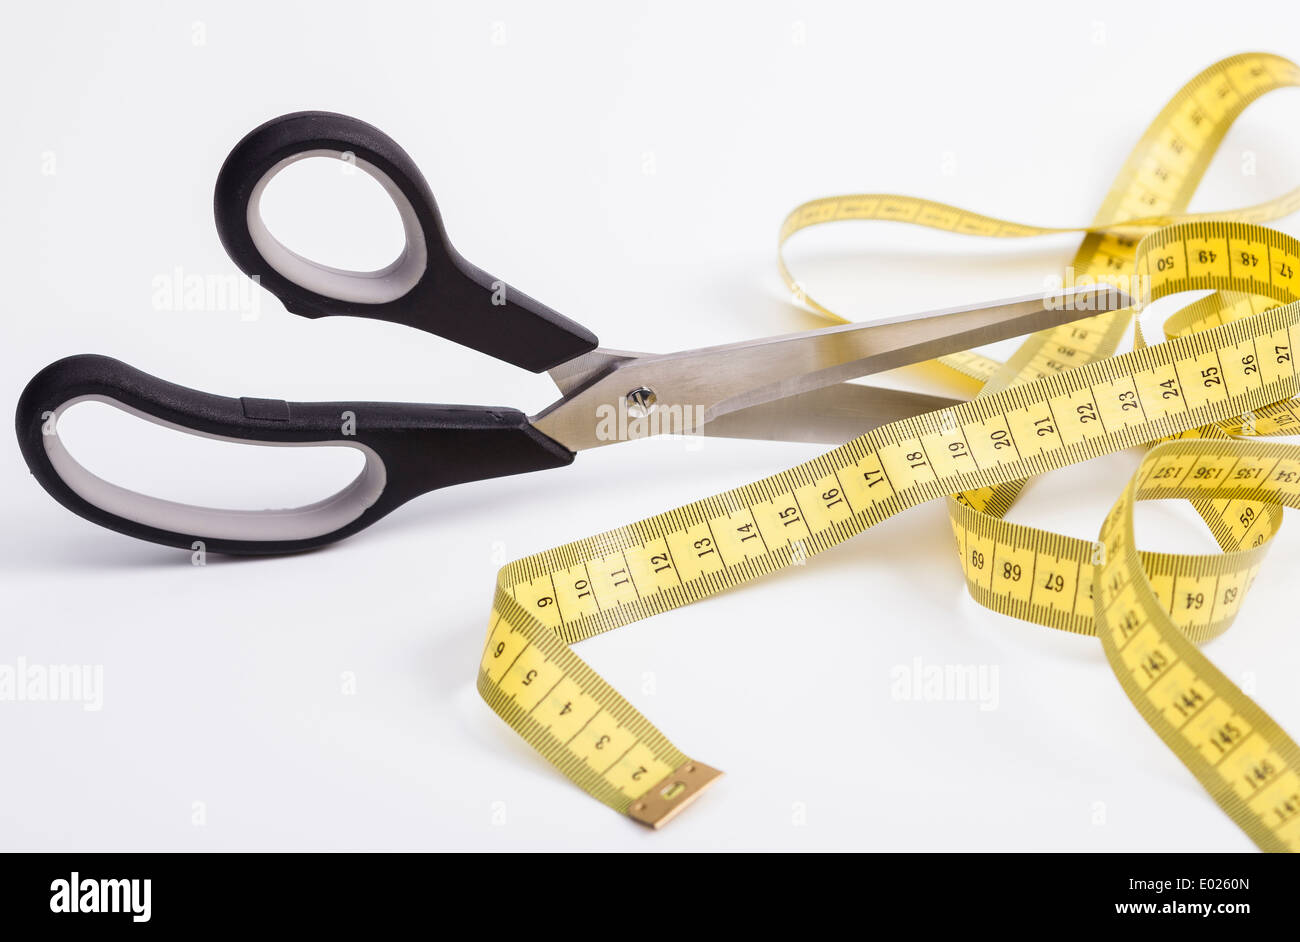 Old Metal Scissors, Tailor Tape Measure And Metal Thimble On Fabric Stock  Photo, Picture and Royalty Free Image. Image 19120436.